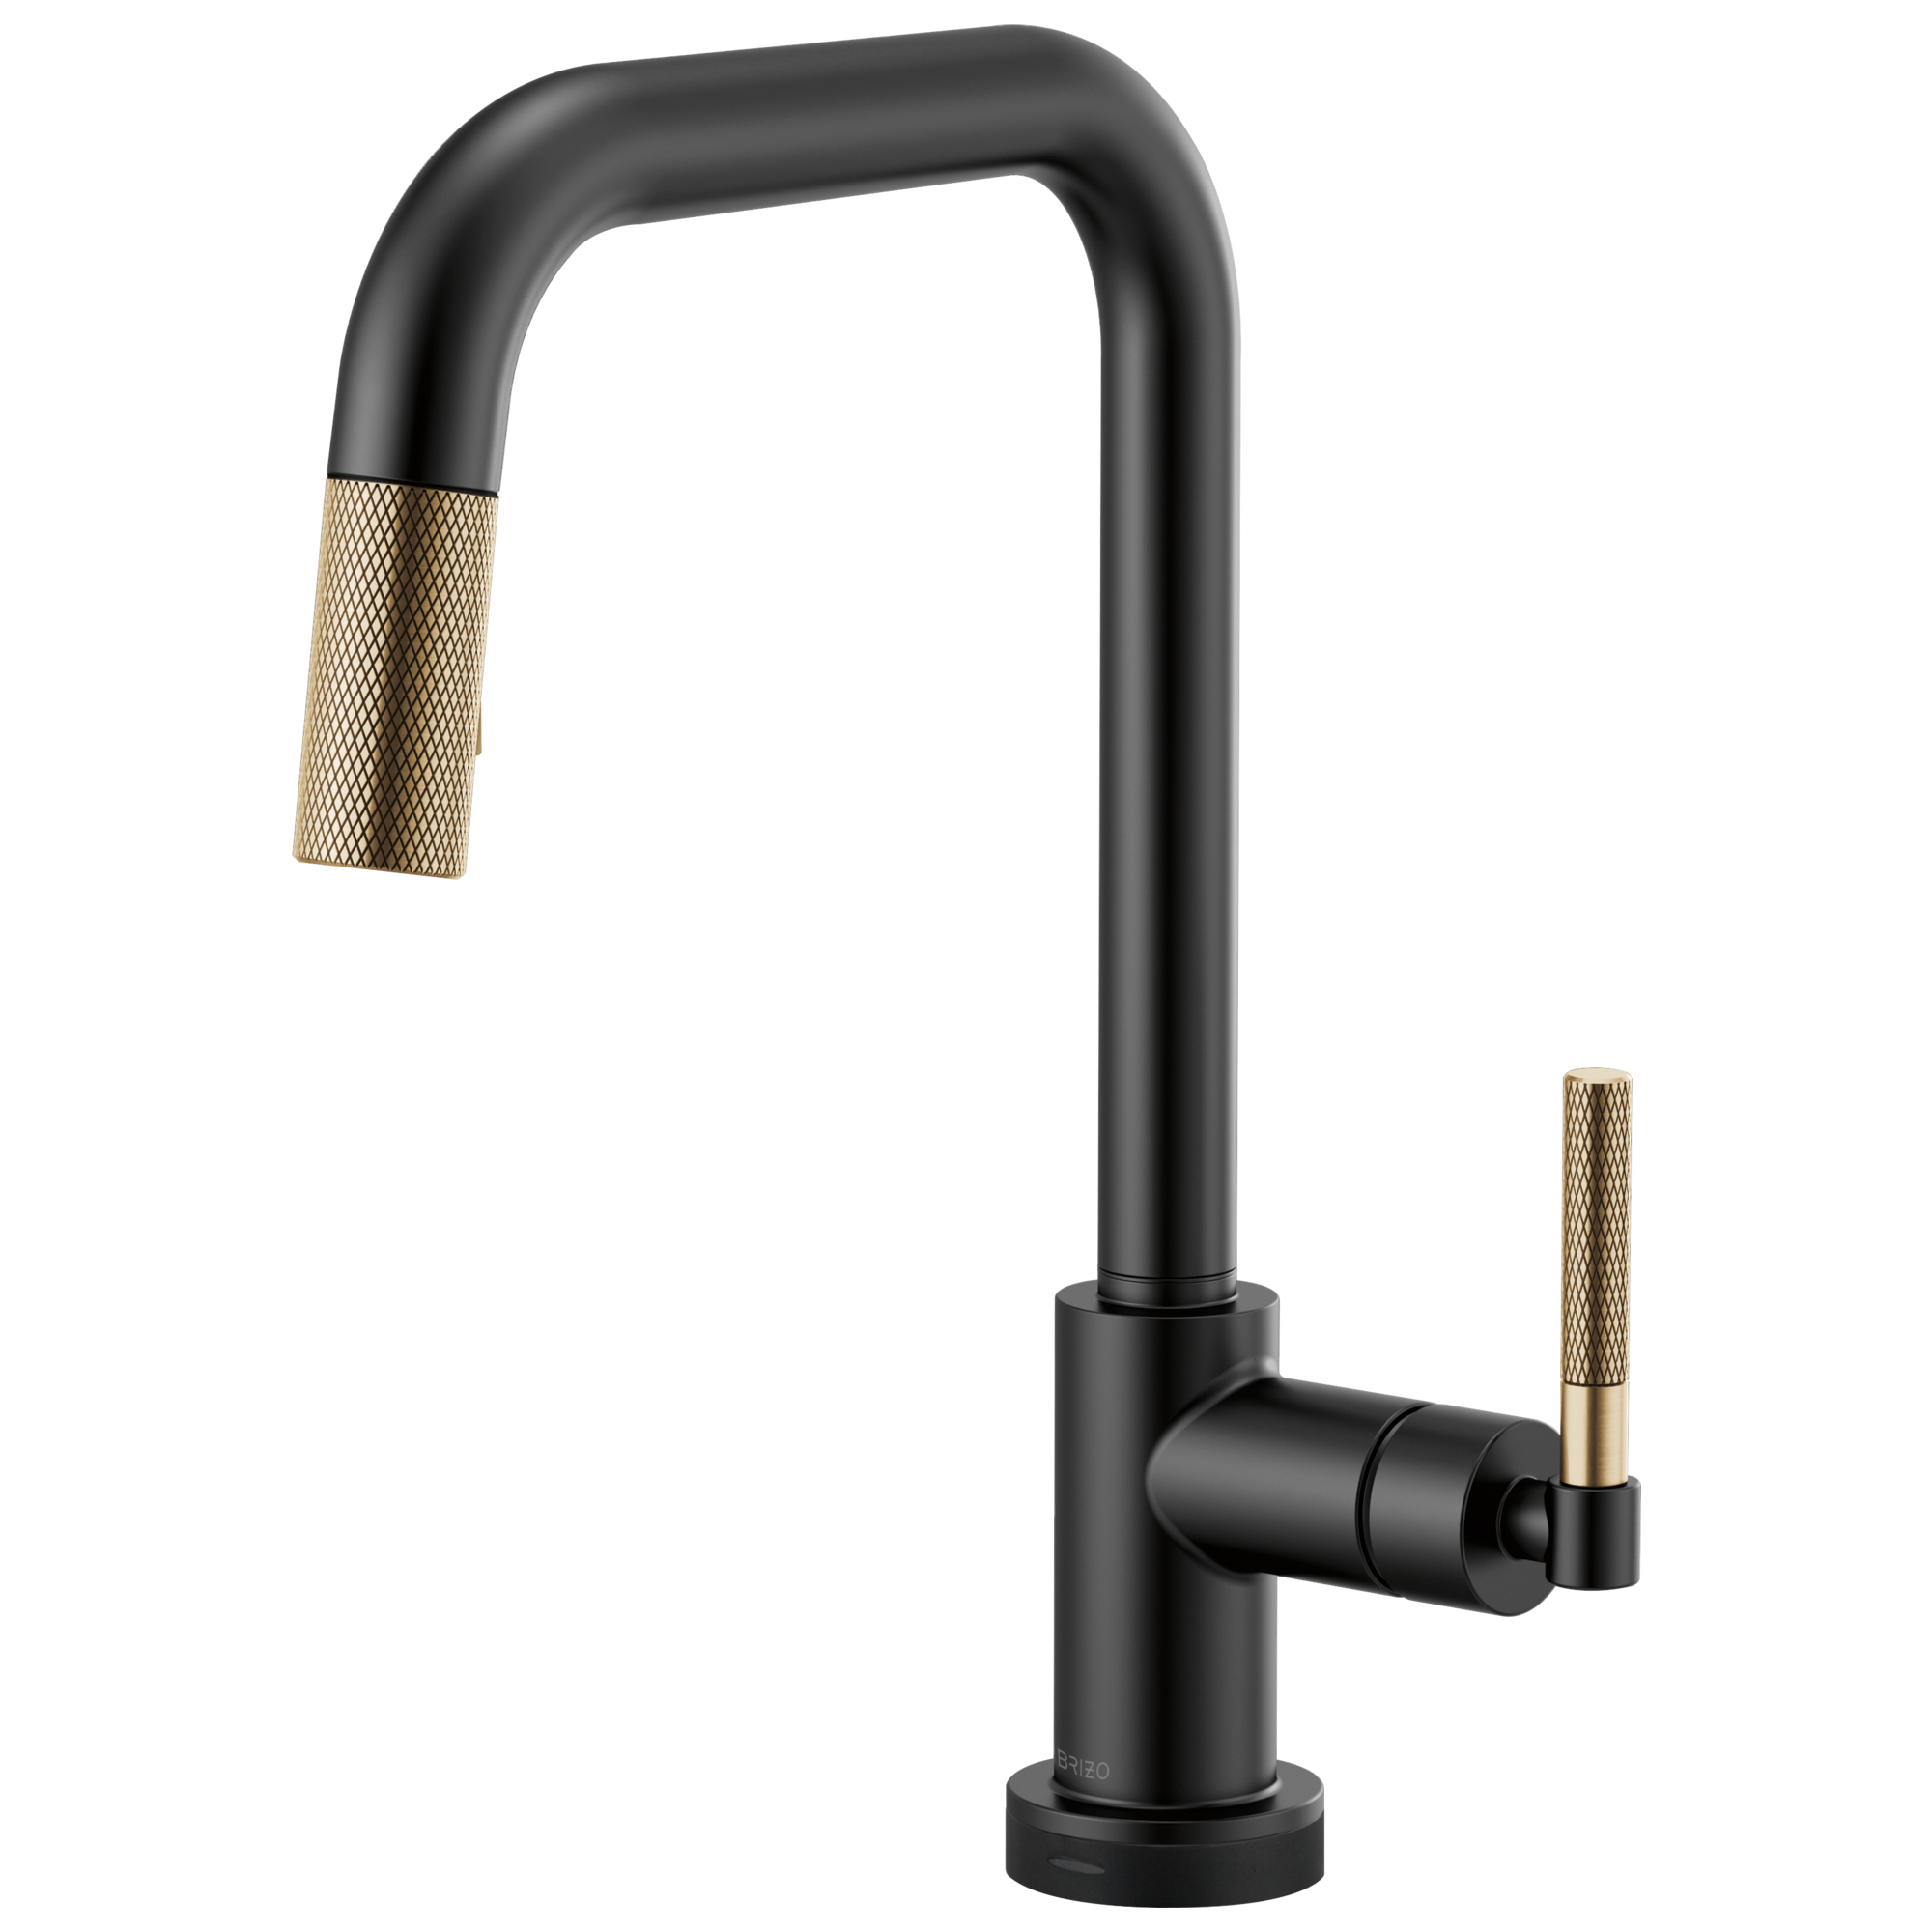 Brizo Litze: SmartTouch Pull-Down Faucet with Square Spout and Knurled Handle